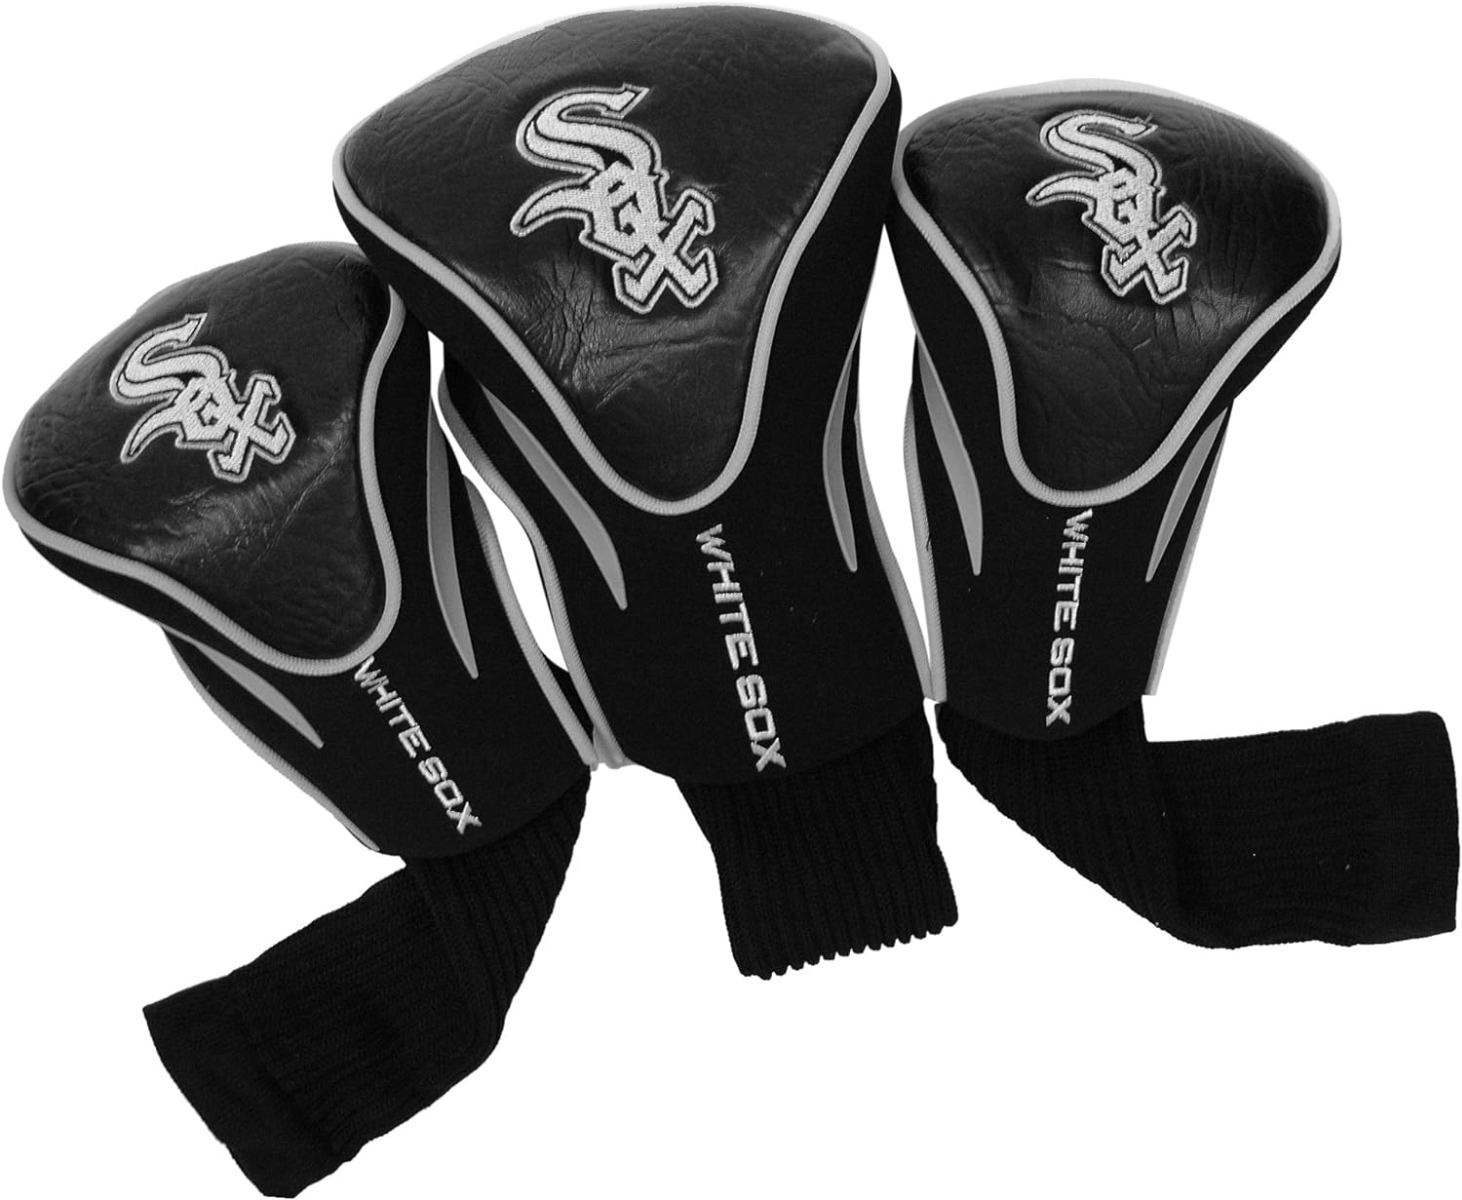 Chicago White Sox 3-Pack Golf Club Headcover